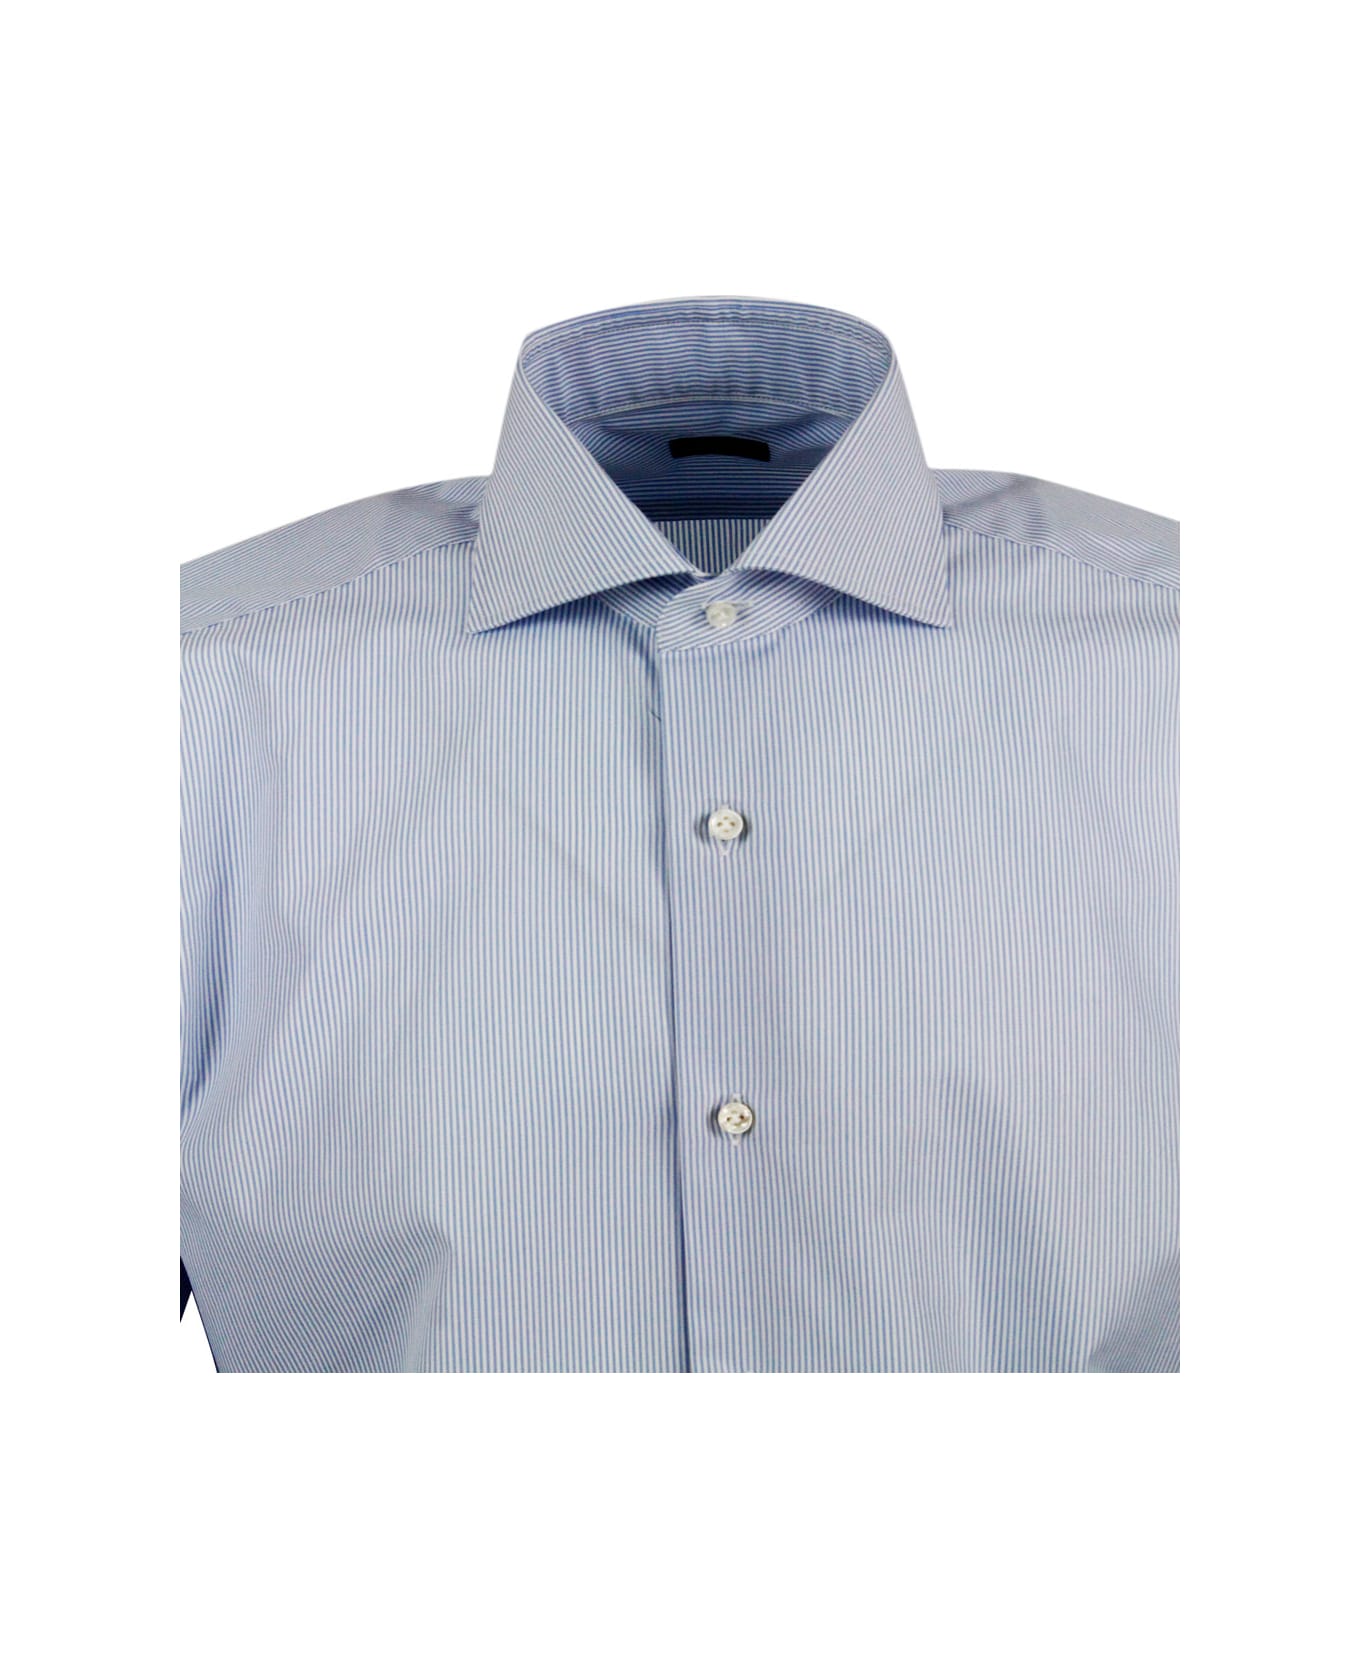 Barba Napoli Slim Fit Shirt With Fine Stripes In Fine Stretch Cotton, Italian Collar, Hand-sewn Black Label And Mother-of-pearl Buttons - Bianco - celeste